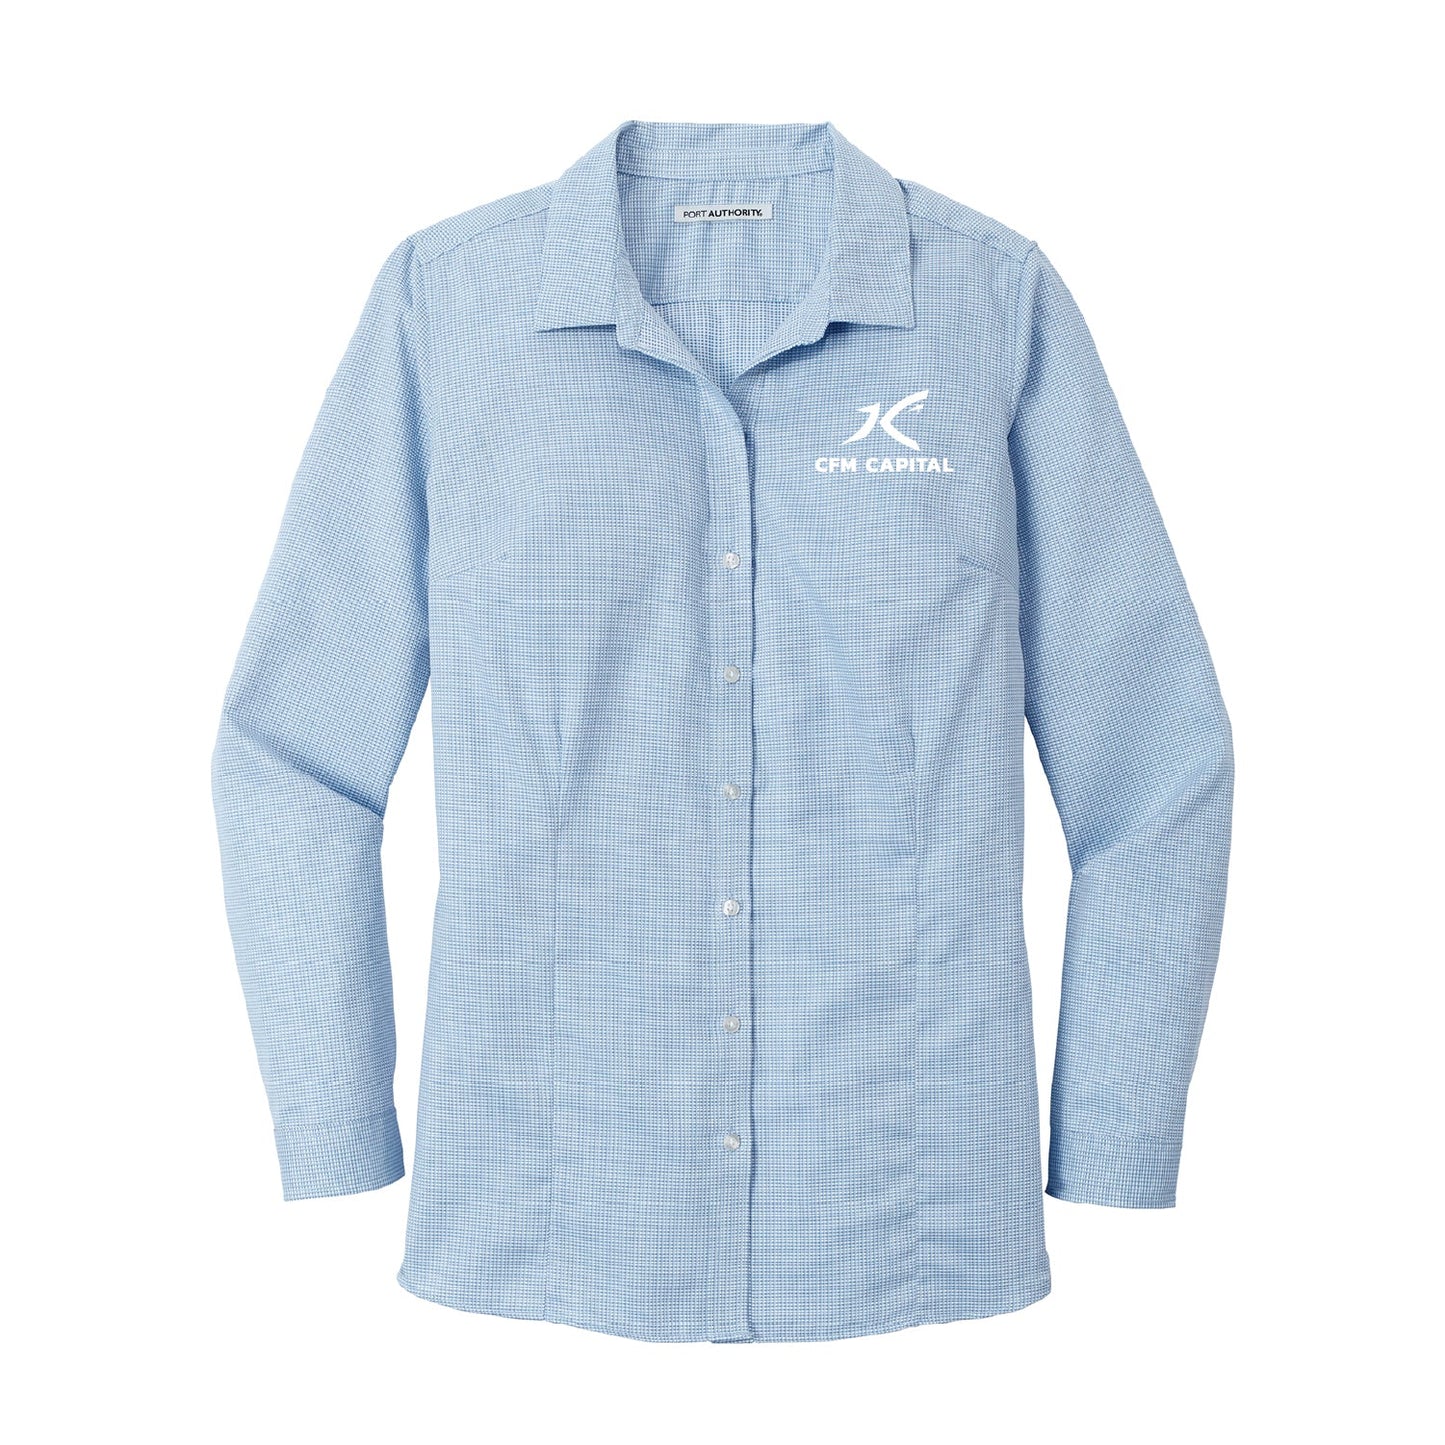 CFM 2 Ladies Pincheck Easy Care Shirt - DSP On Demand